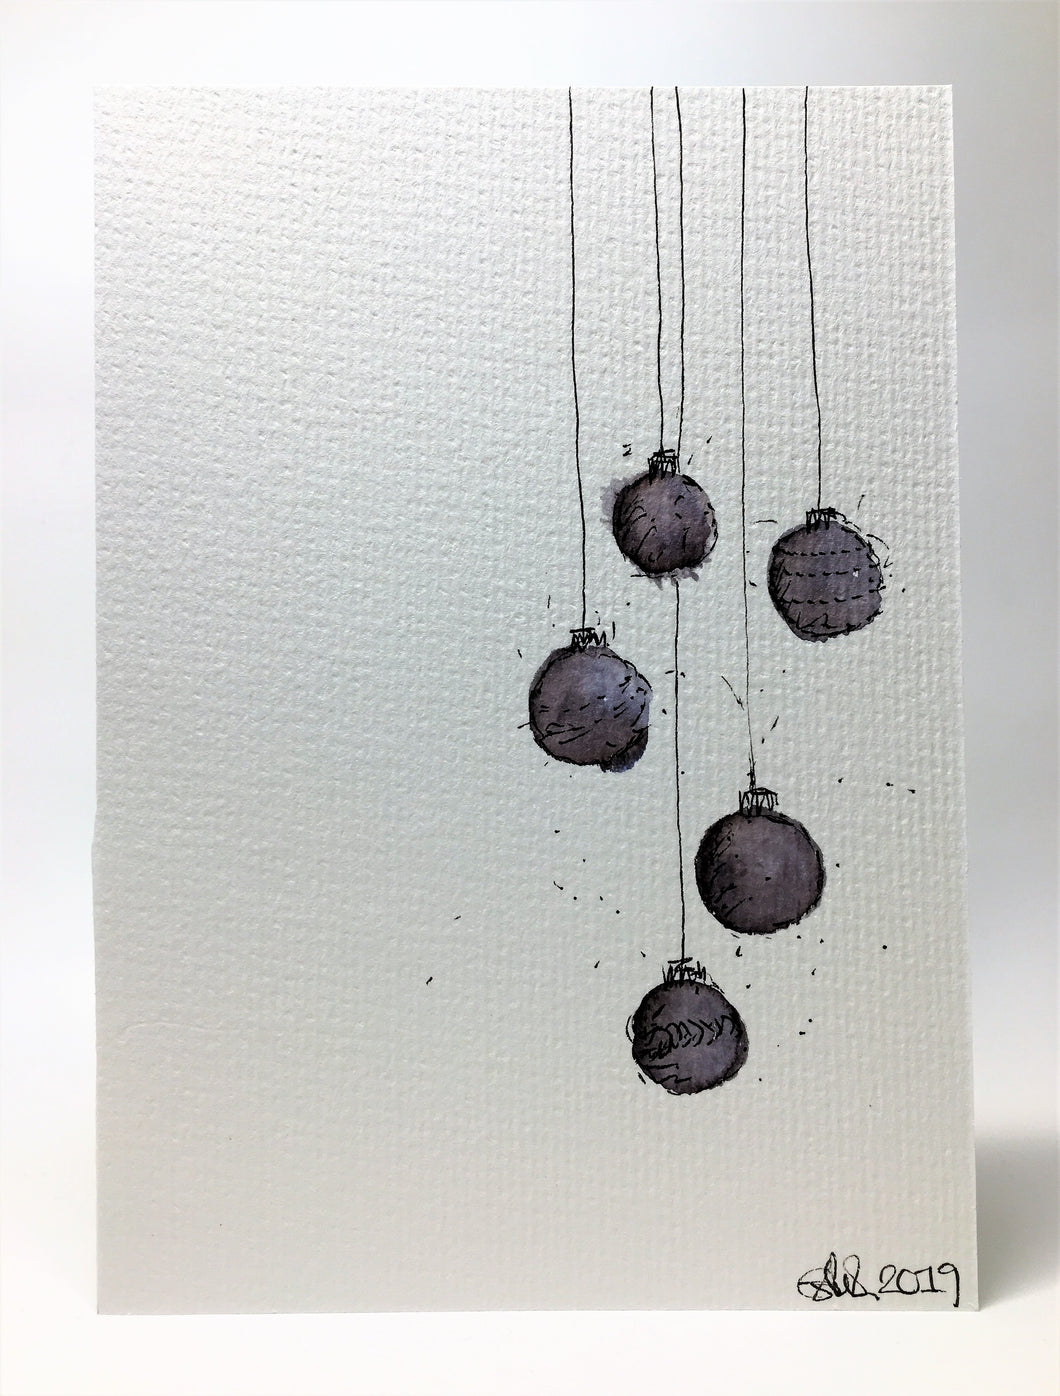 Original Hand Painted Christmas Card - Bauble Collection - Black and Grey - eDgE dEsiGn London